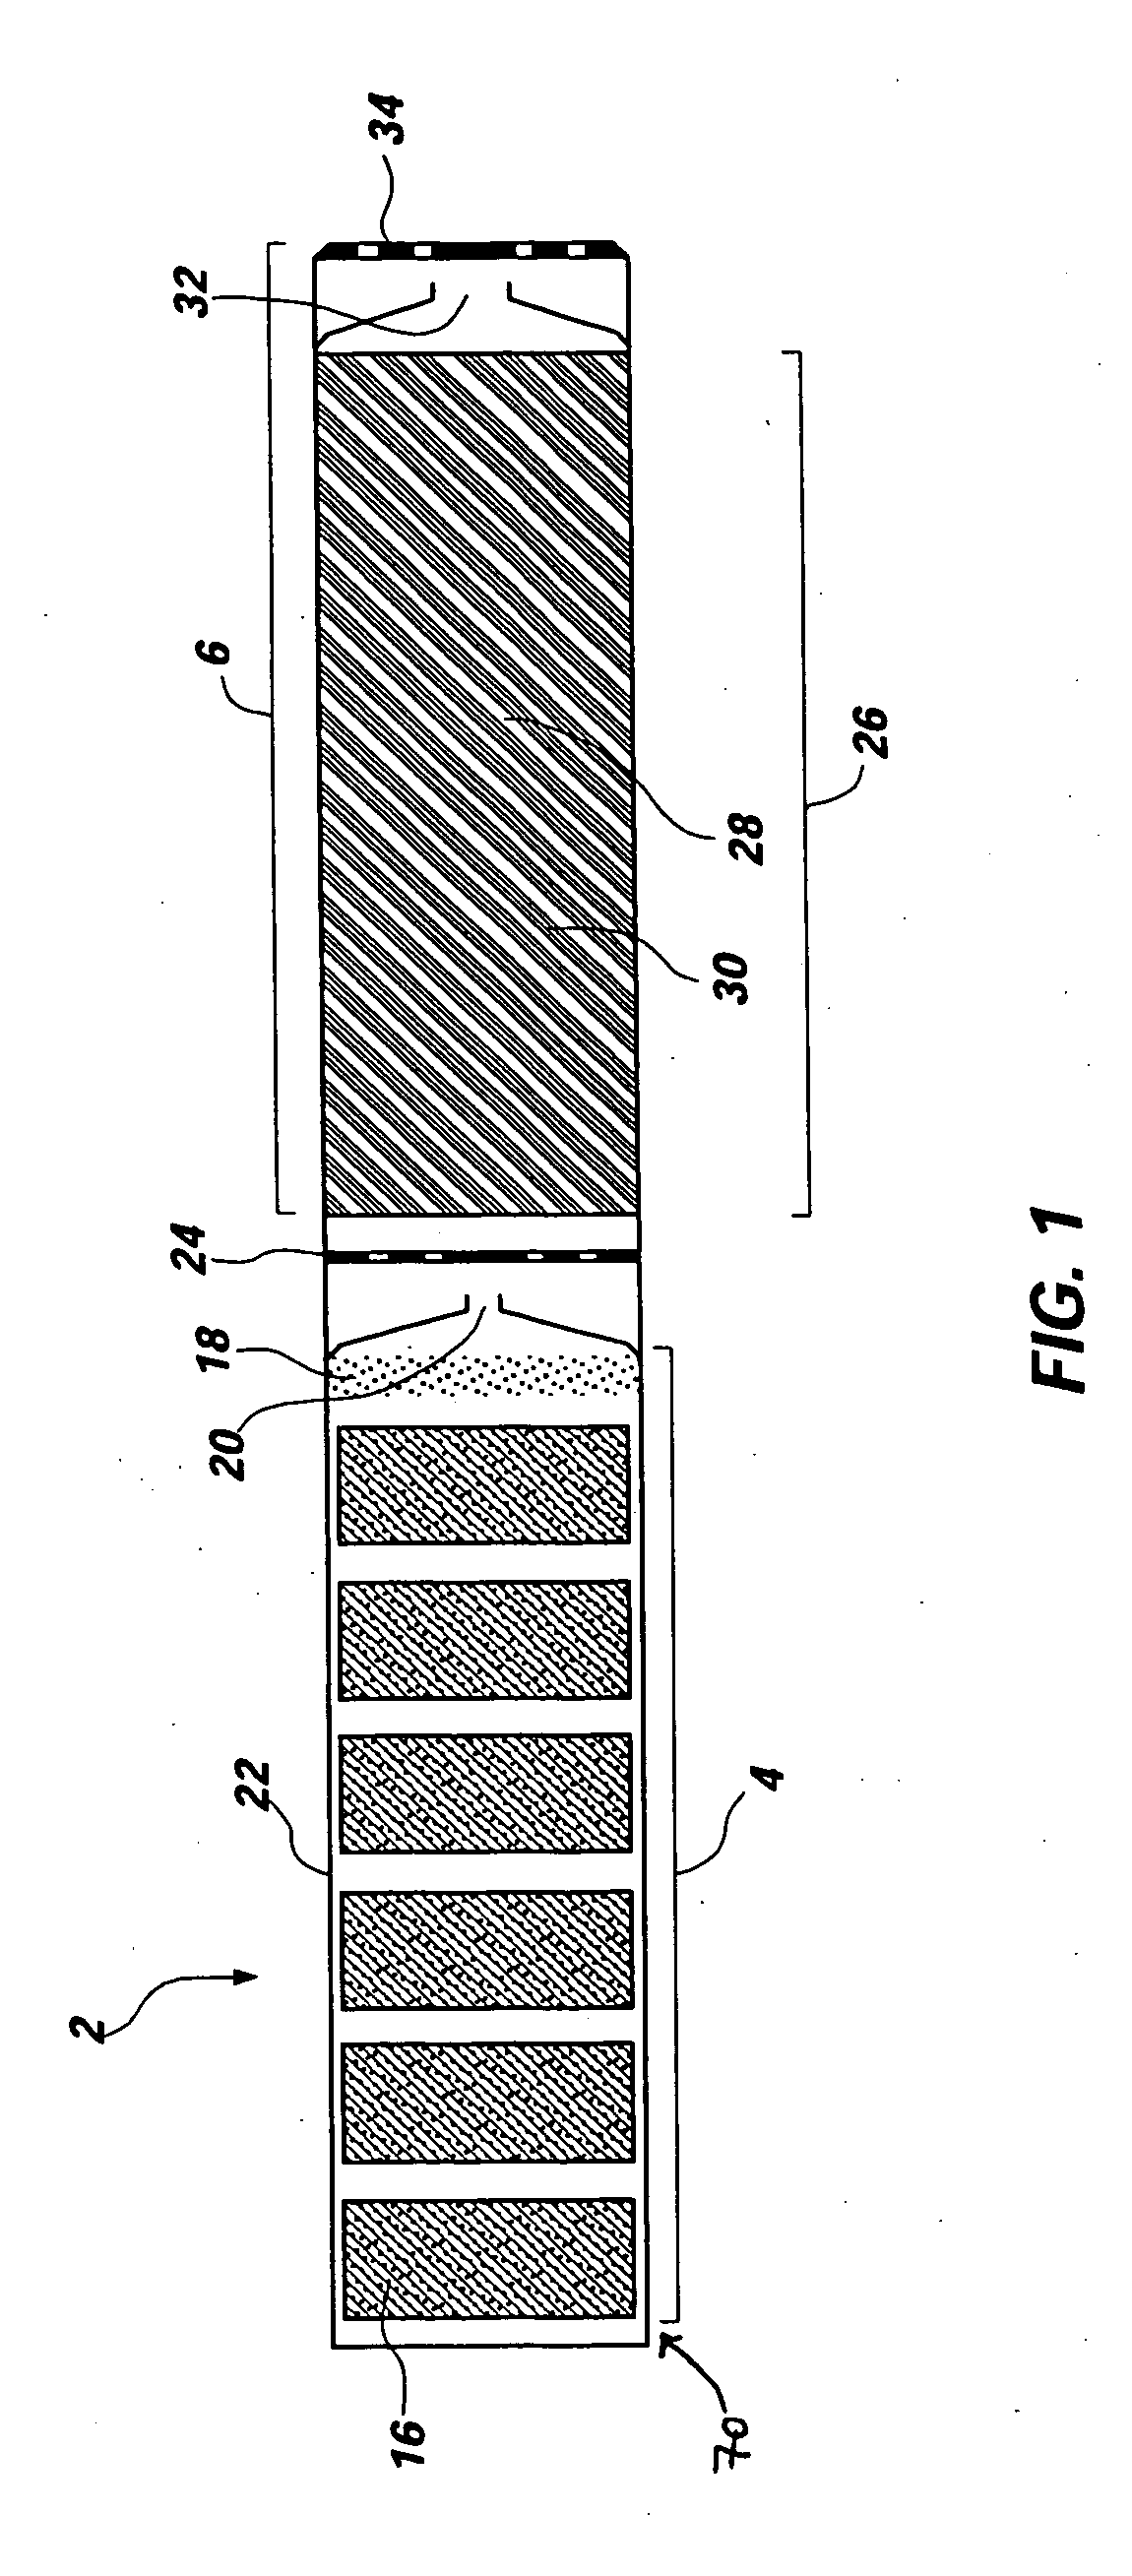 Man-rated fire suppression system and related methods